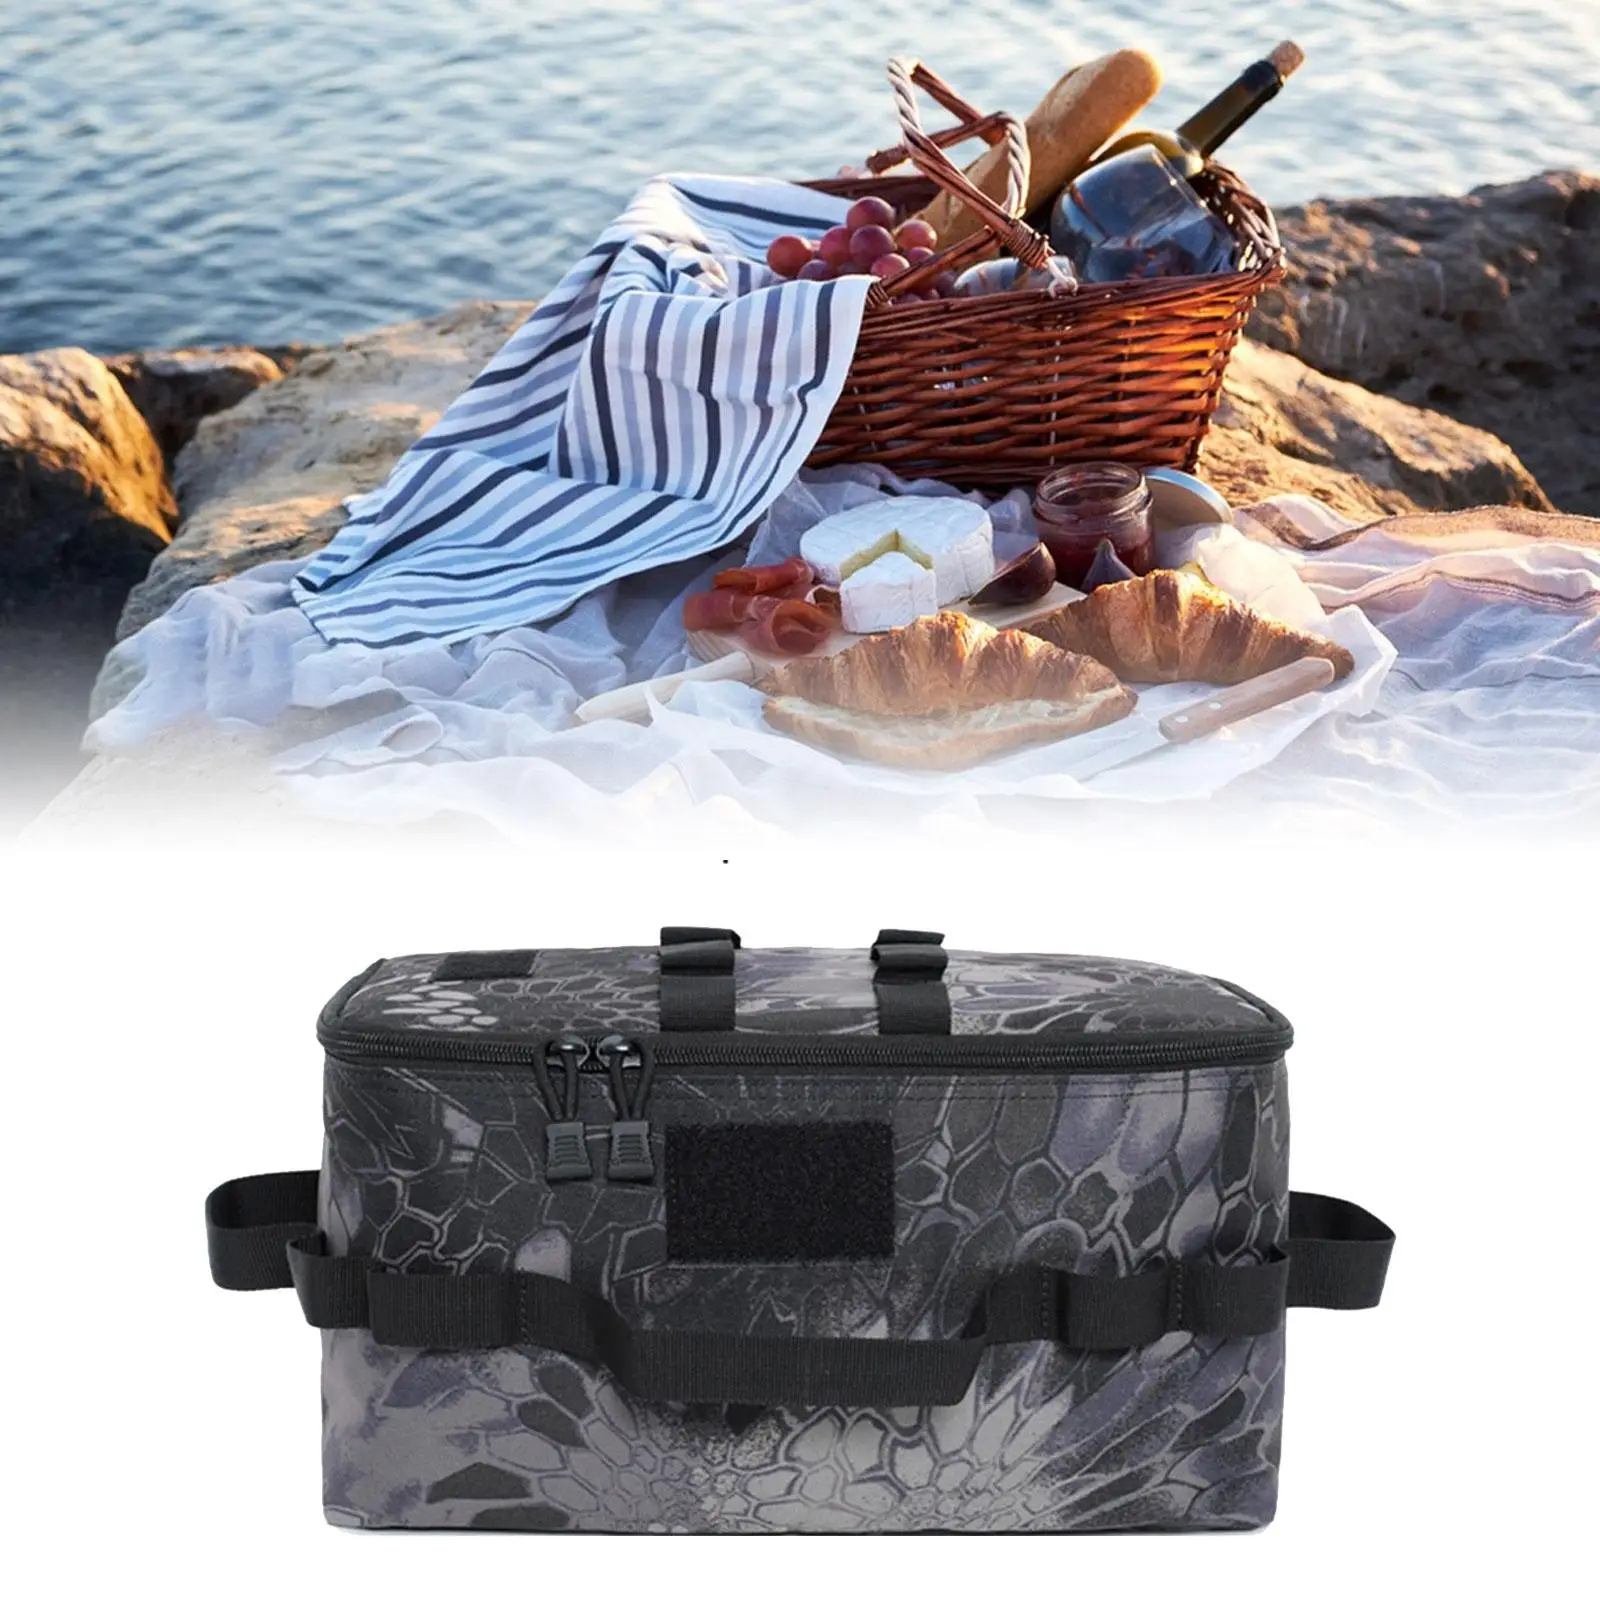 Camping Storage Bags Toolbox BBQ Cooking Utensils Carry Bag Sturdy Upper Cover Mesh Pocket Design for Family Hiking Versatile